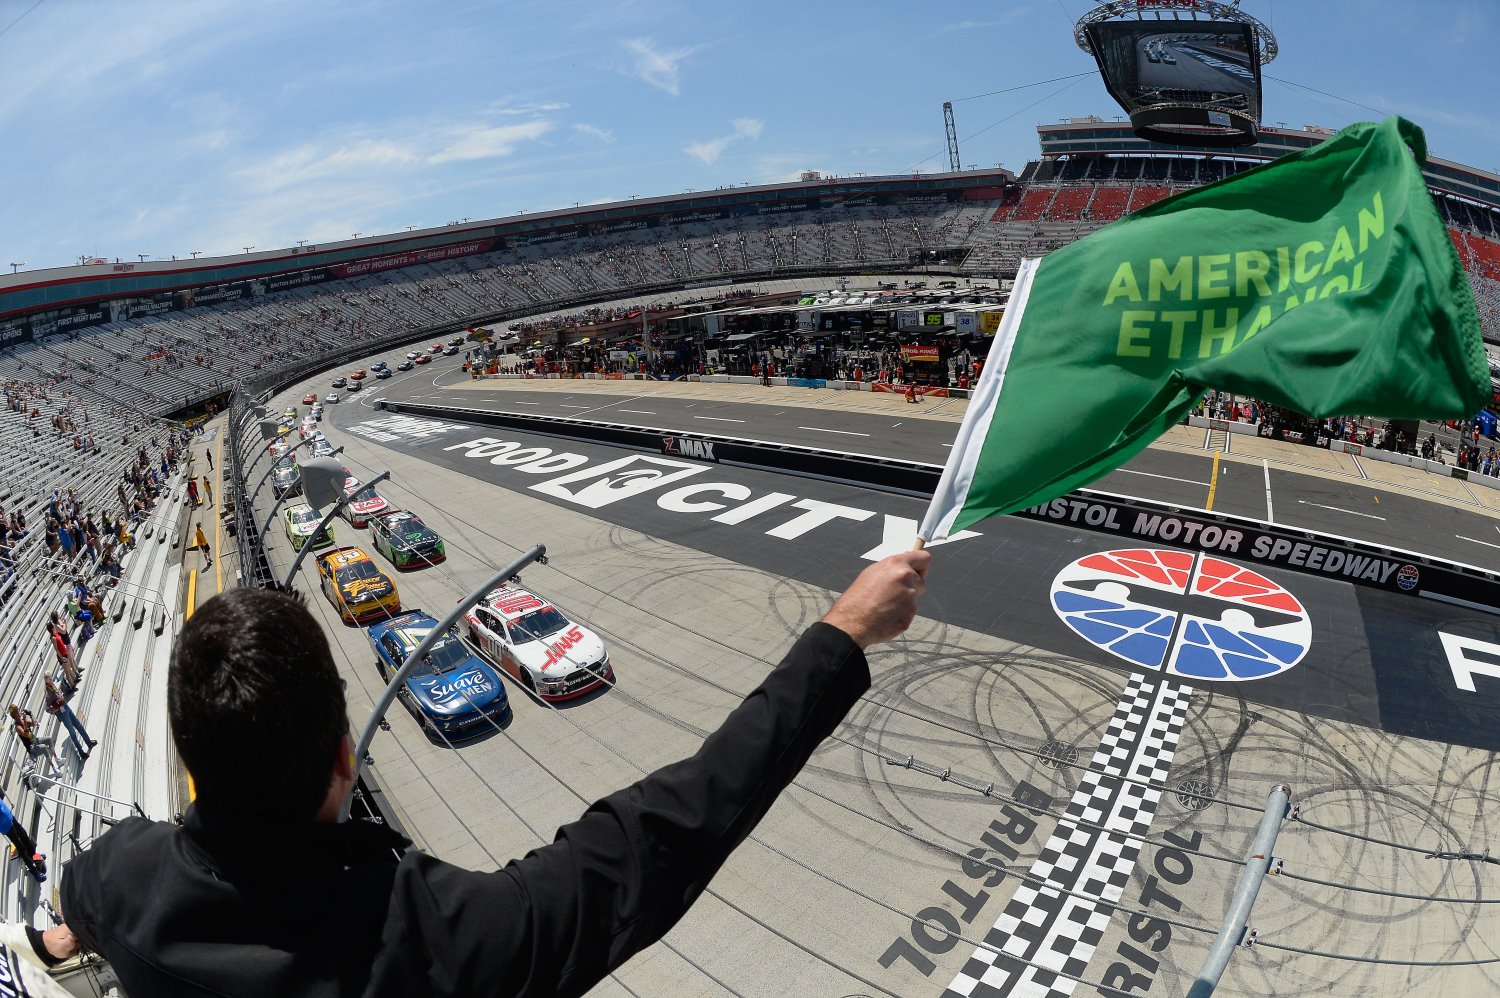 NASCAR is in a serious downward spiral with plummeting TV ratings and crowds